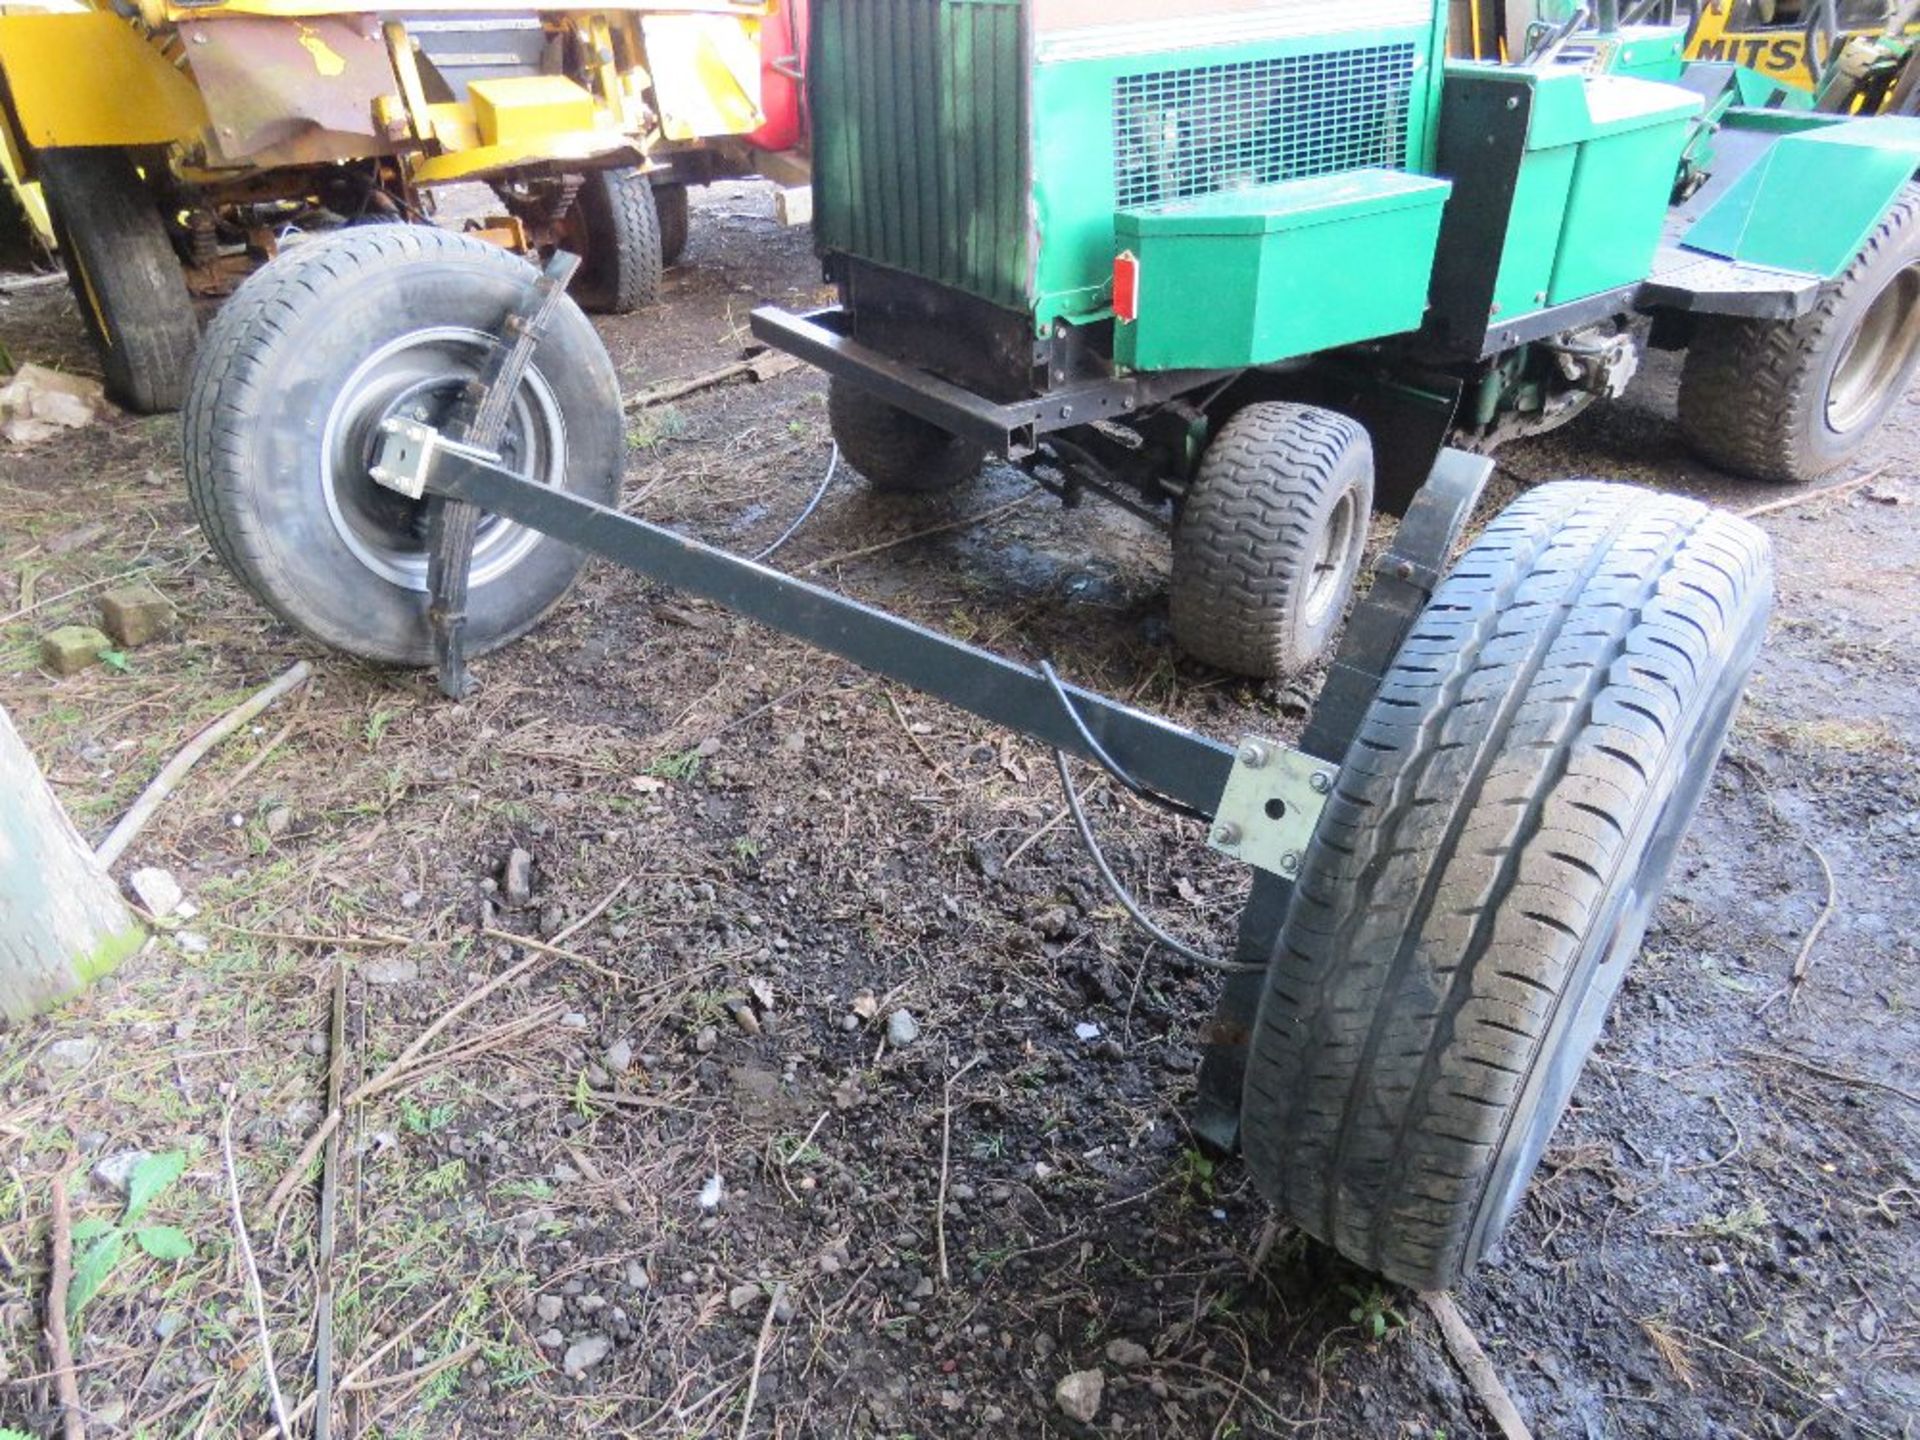 HEAVY DUTY TRAILER AXLE WITH SPRINGS, BELIEVED TO BE OFF GROUNDHOG TYPE WELFARE UNIT?? ....THIS LOT